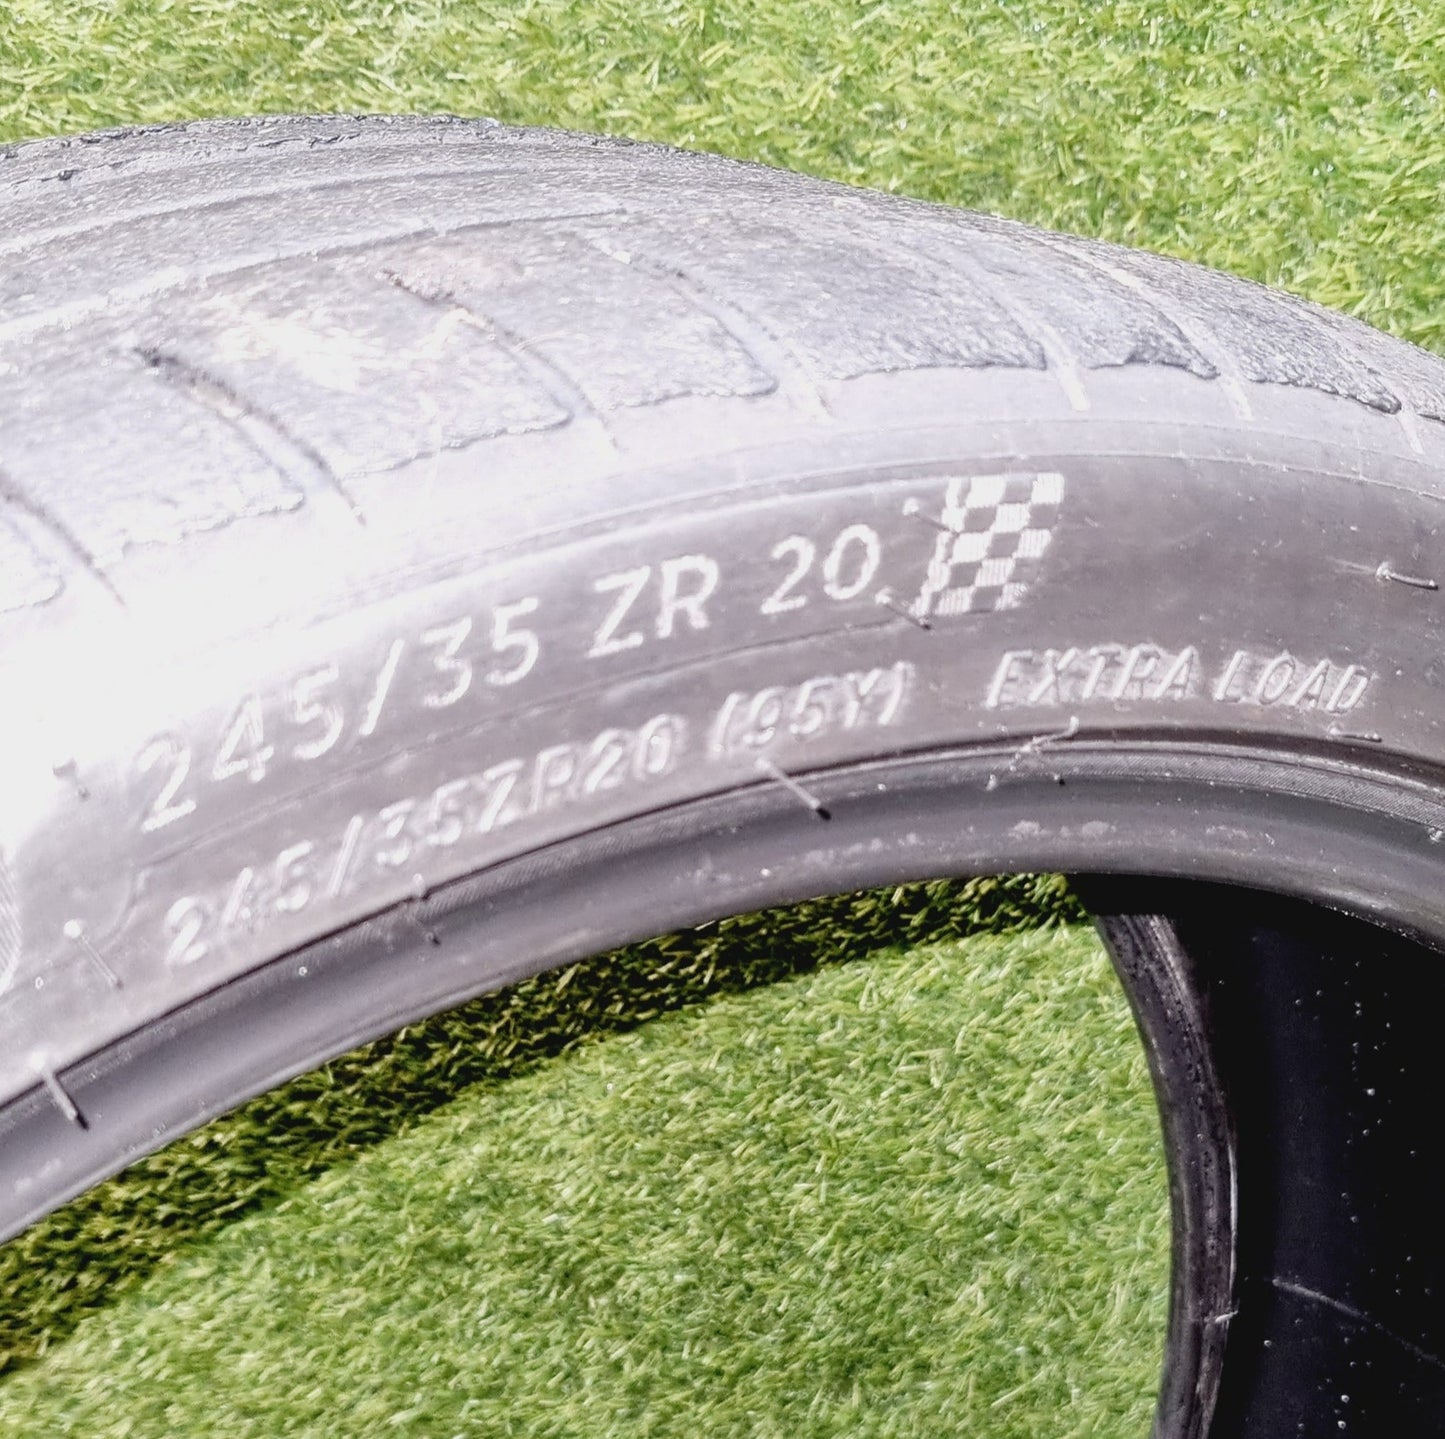 Michelin Pilot 4S 245/35/20 - 6mm tread. Several available. Price is per tyre.